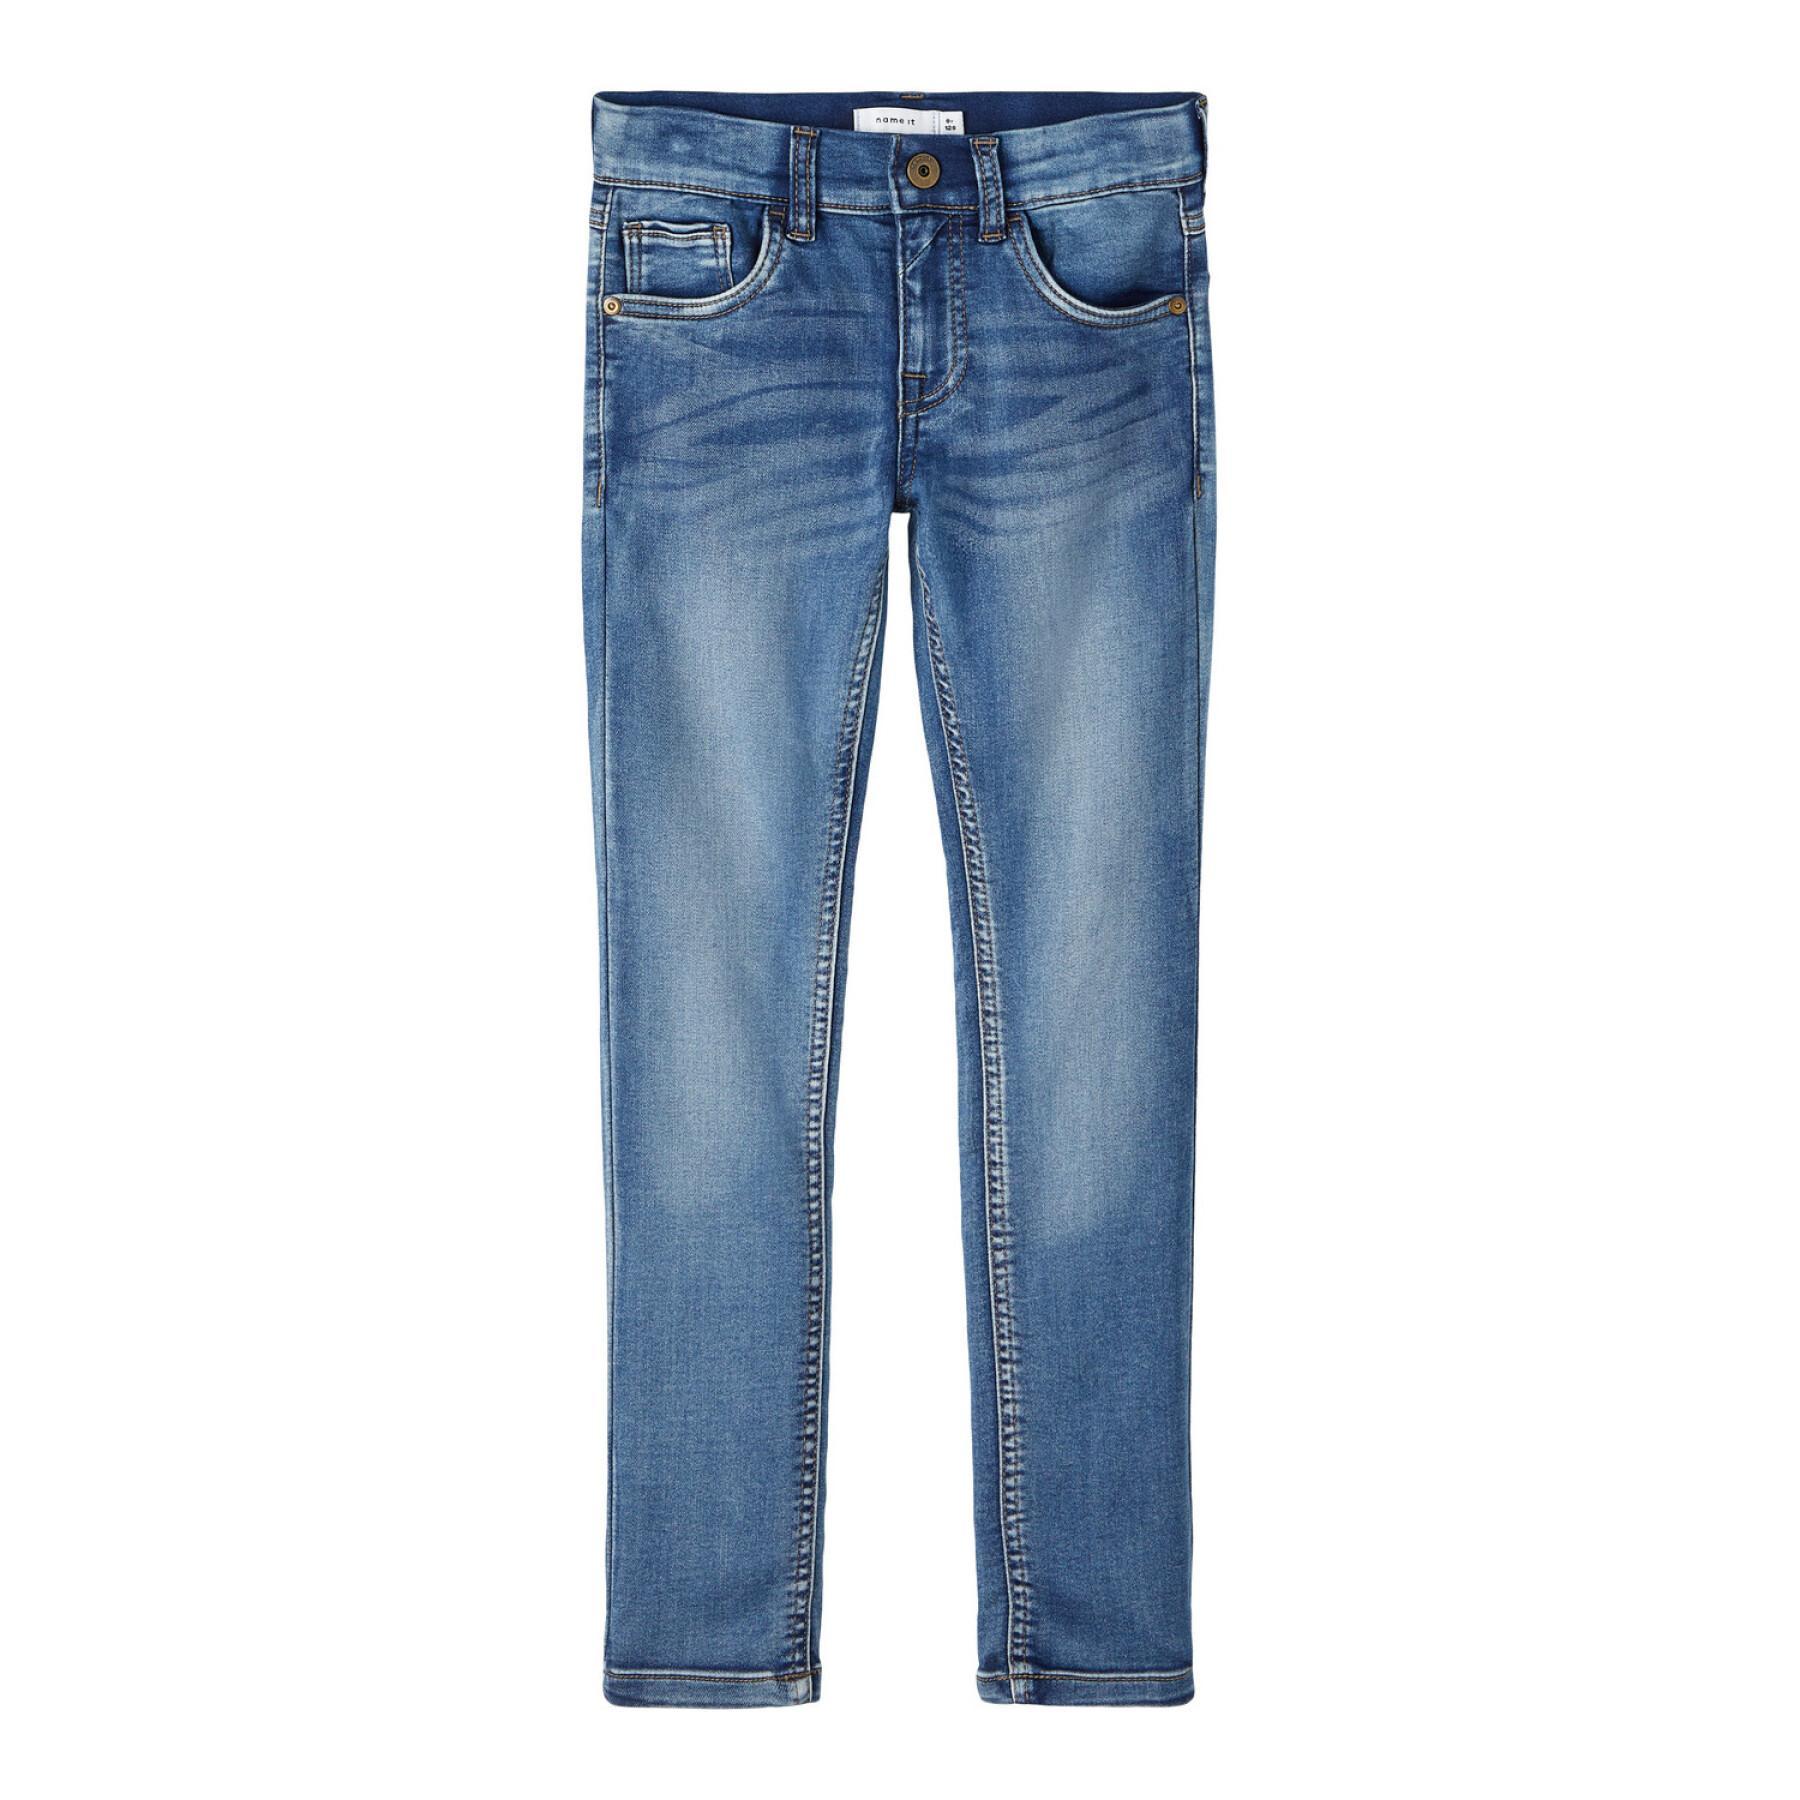 Jungen-Jeans Name it Theo 3113-TH